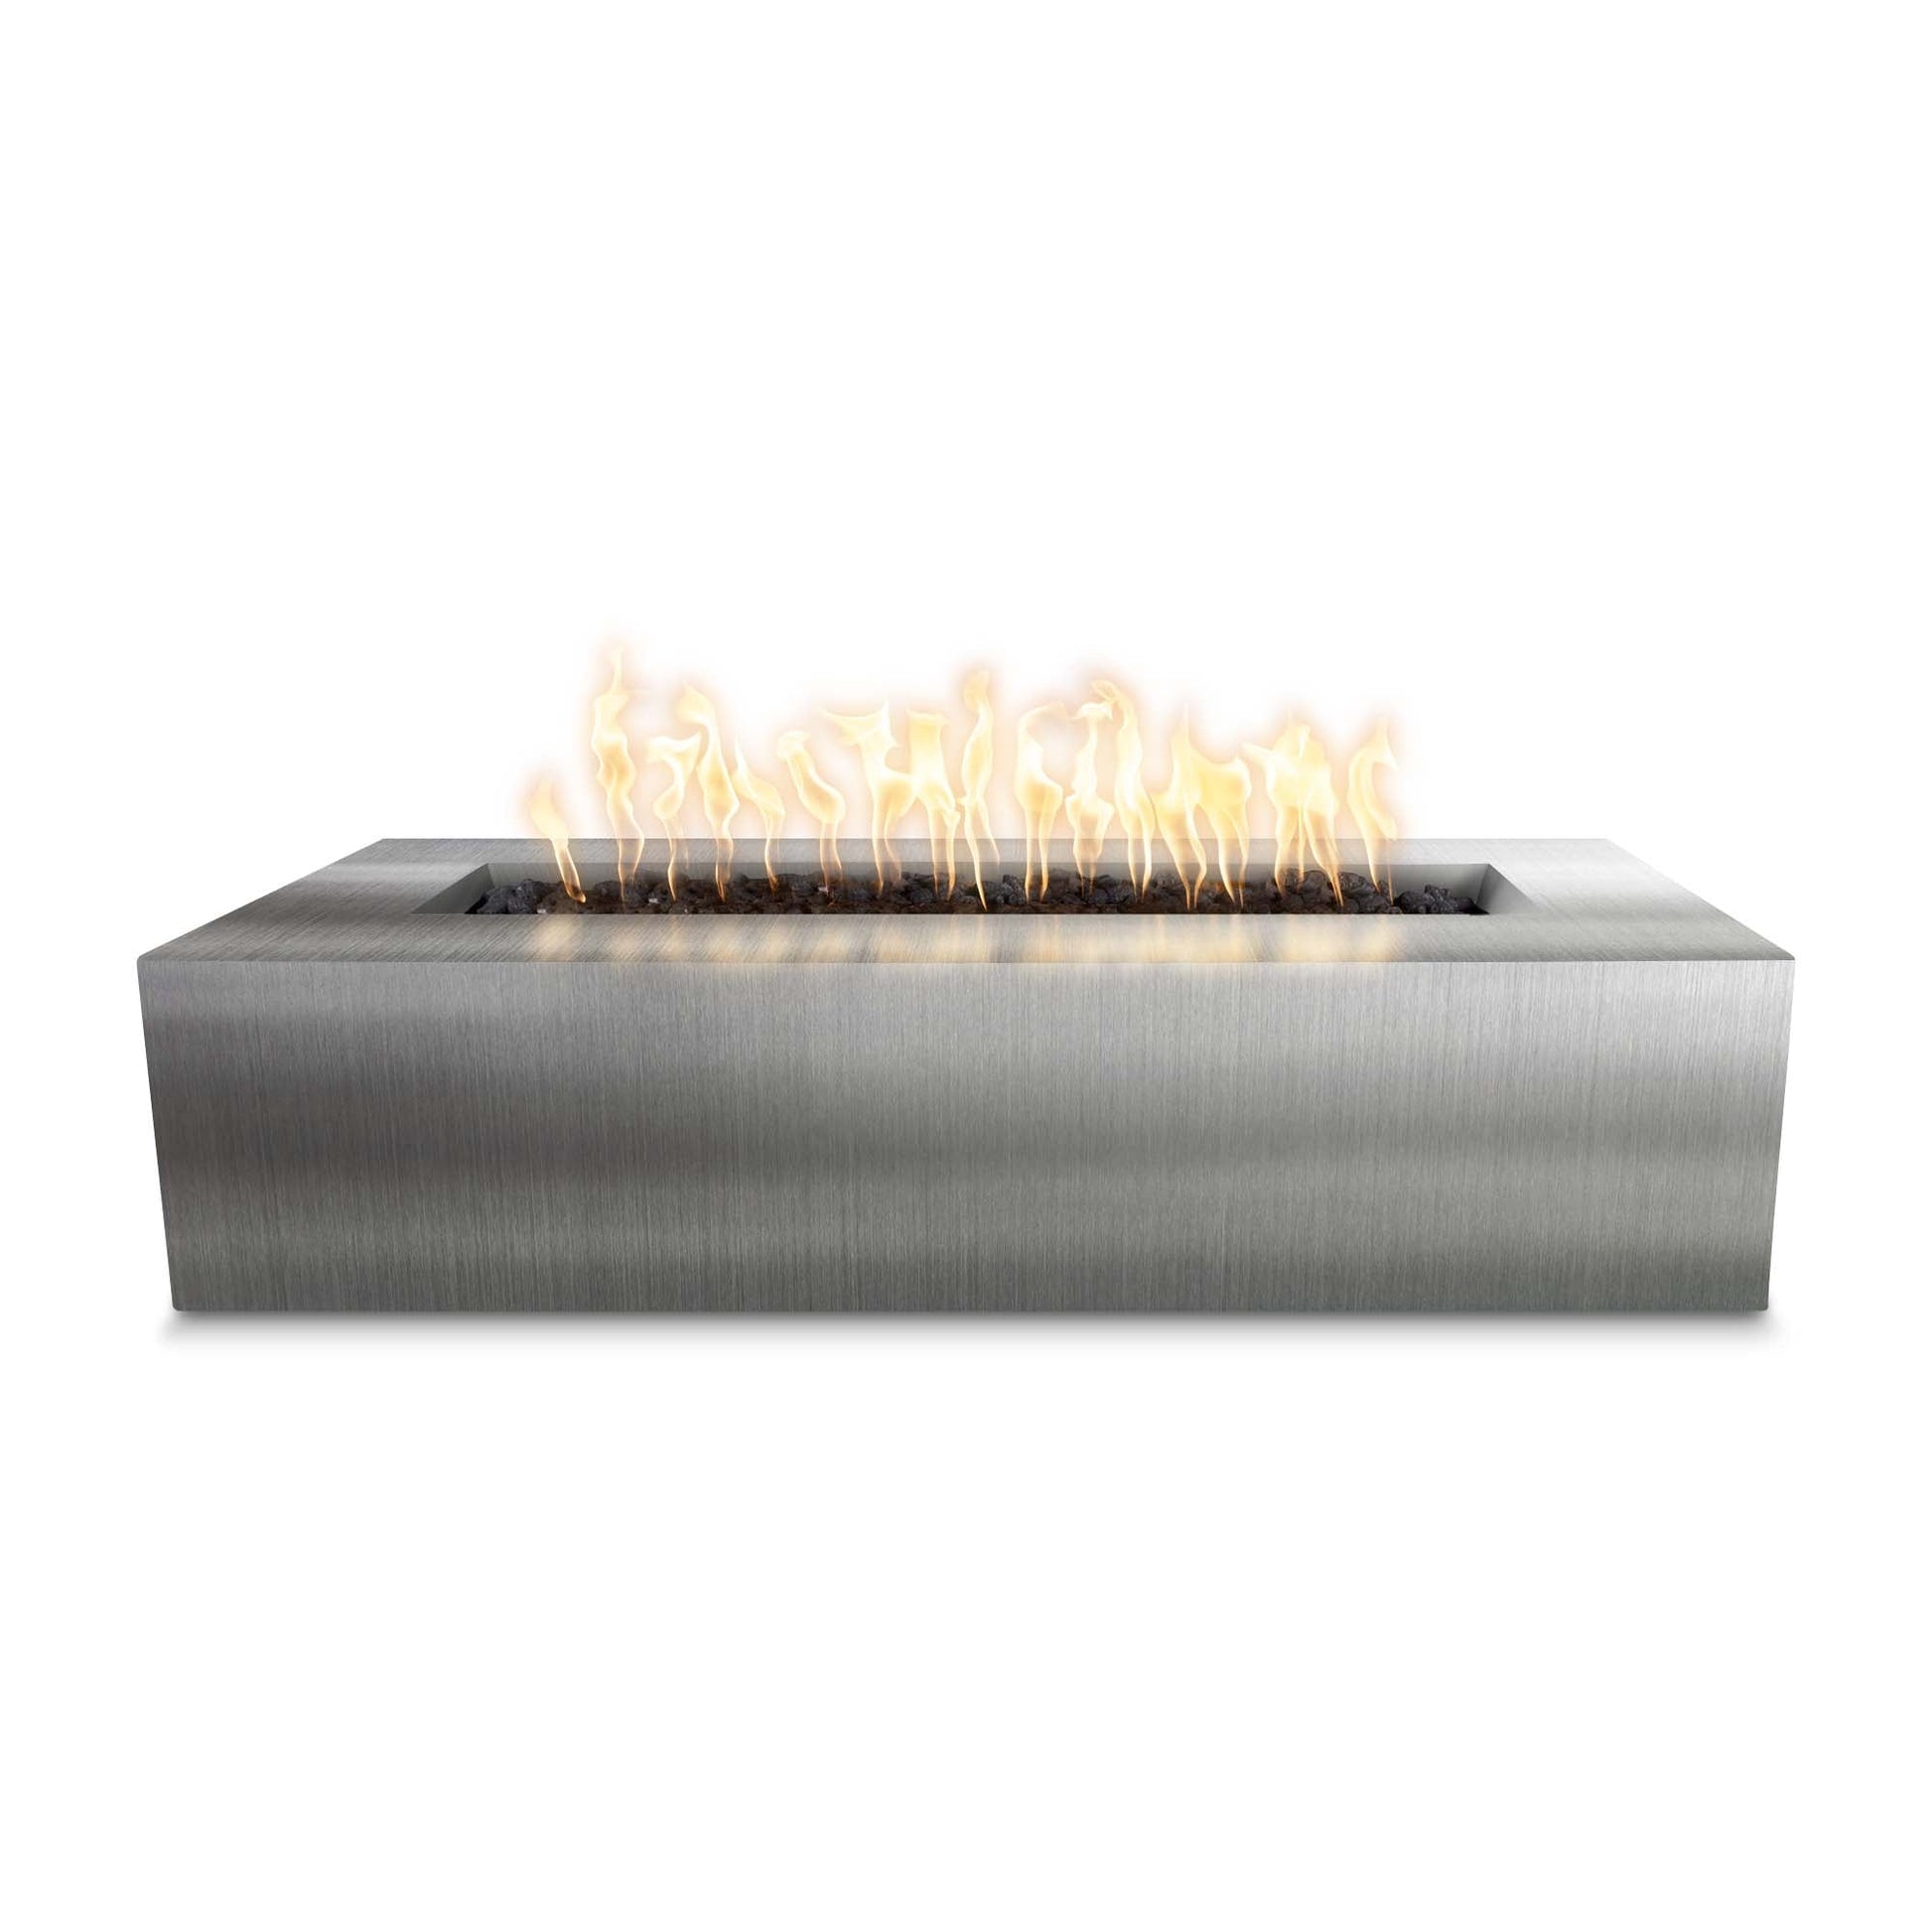 The Outdoor Plus Rectangular Regal 48" Hammered Copper Liquid Propane Fire Pit with 110V Electronic Ignition